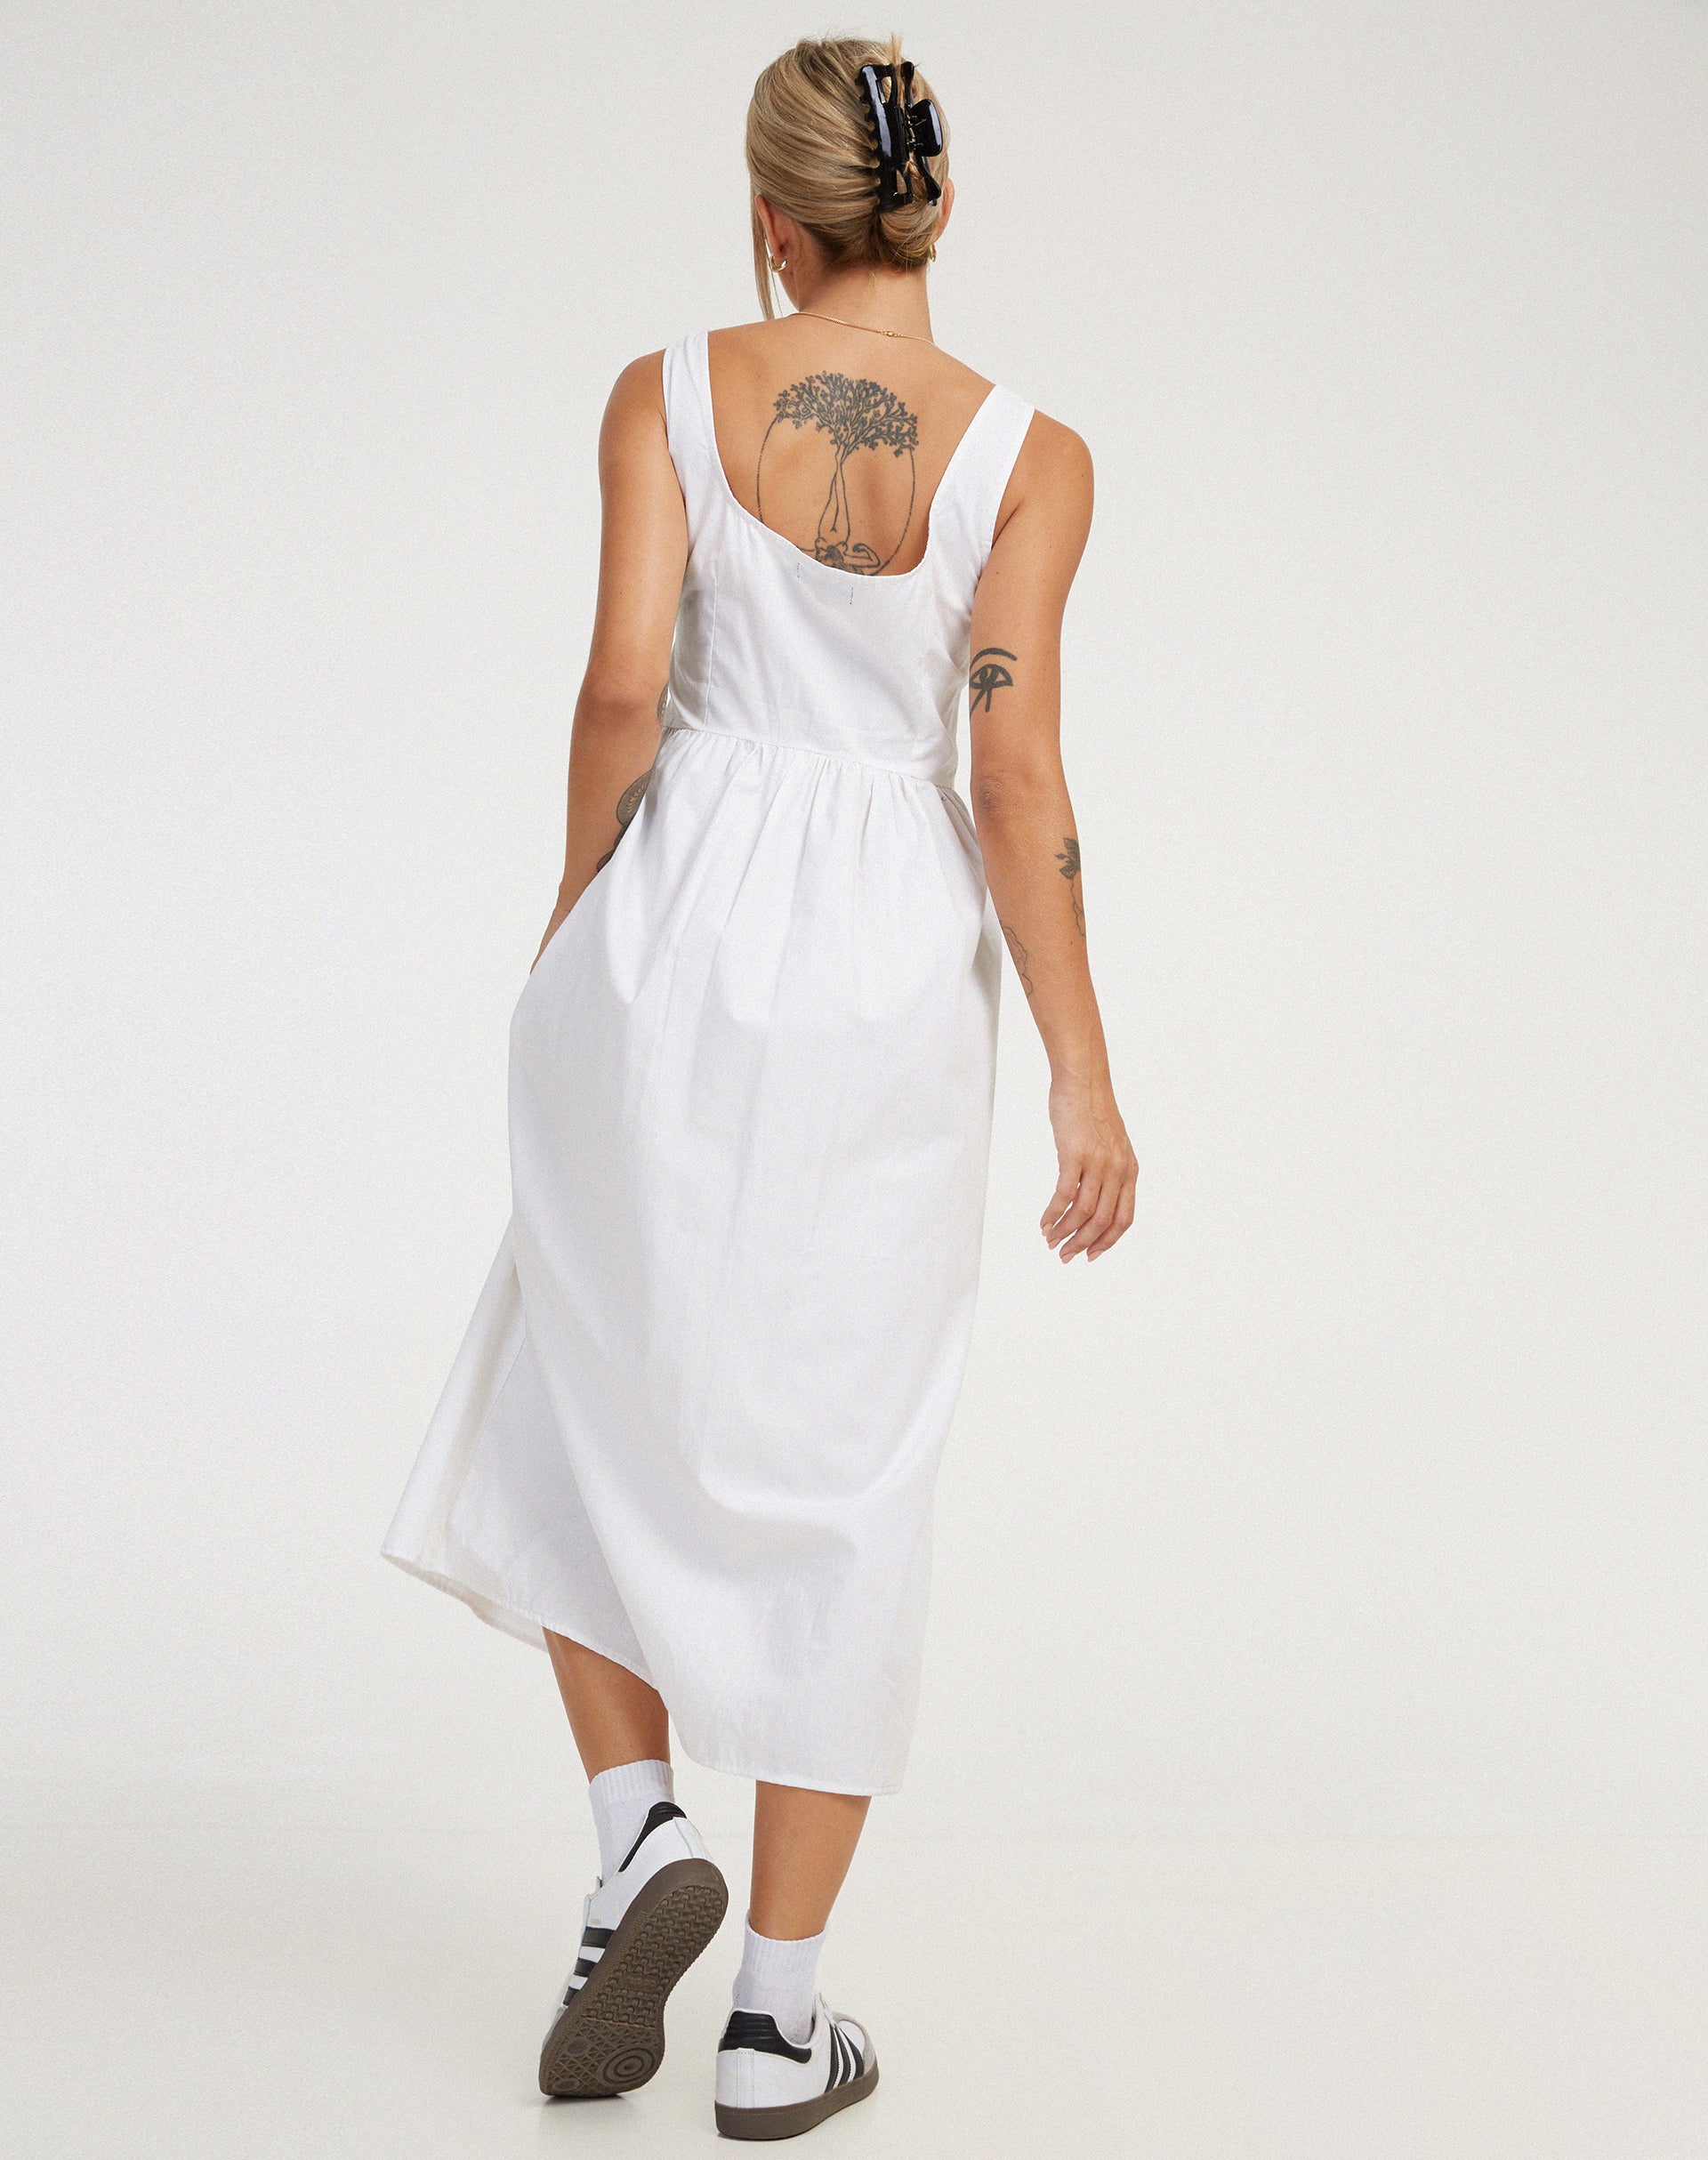 image of Melrose Maxi Dress in White